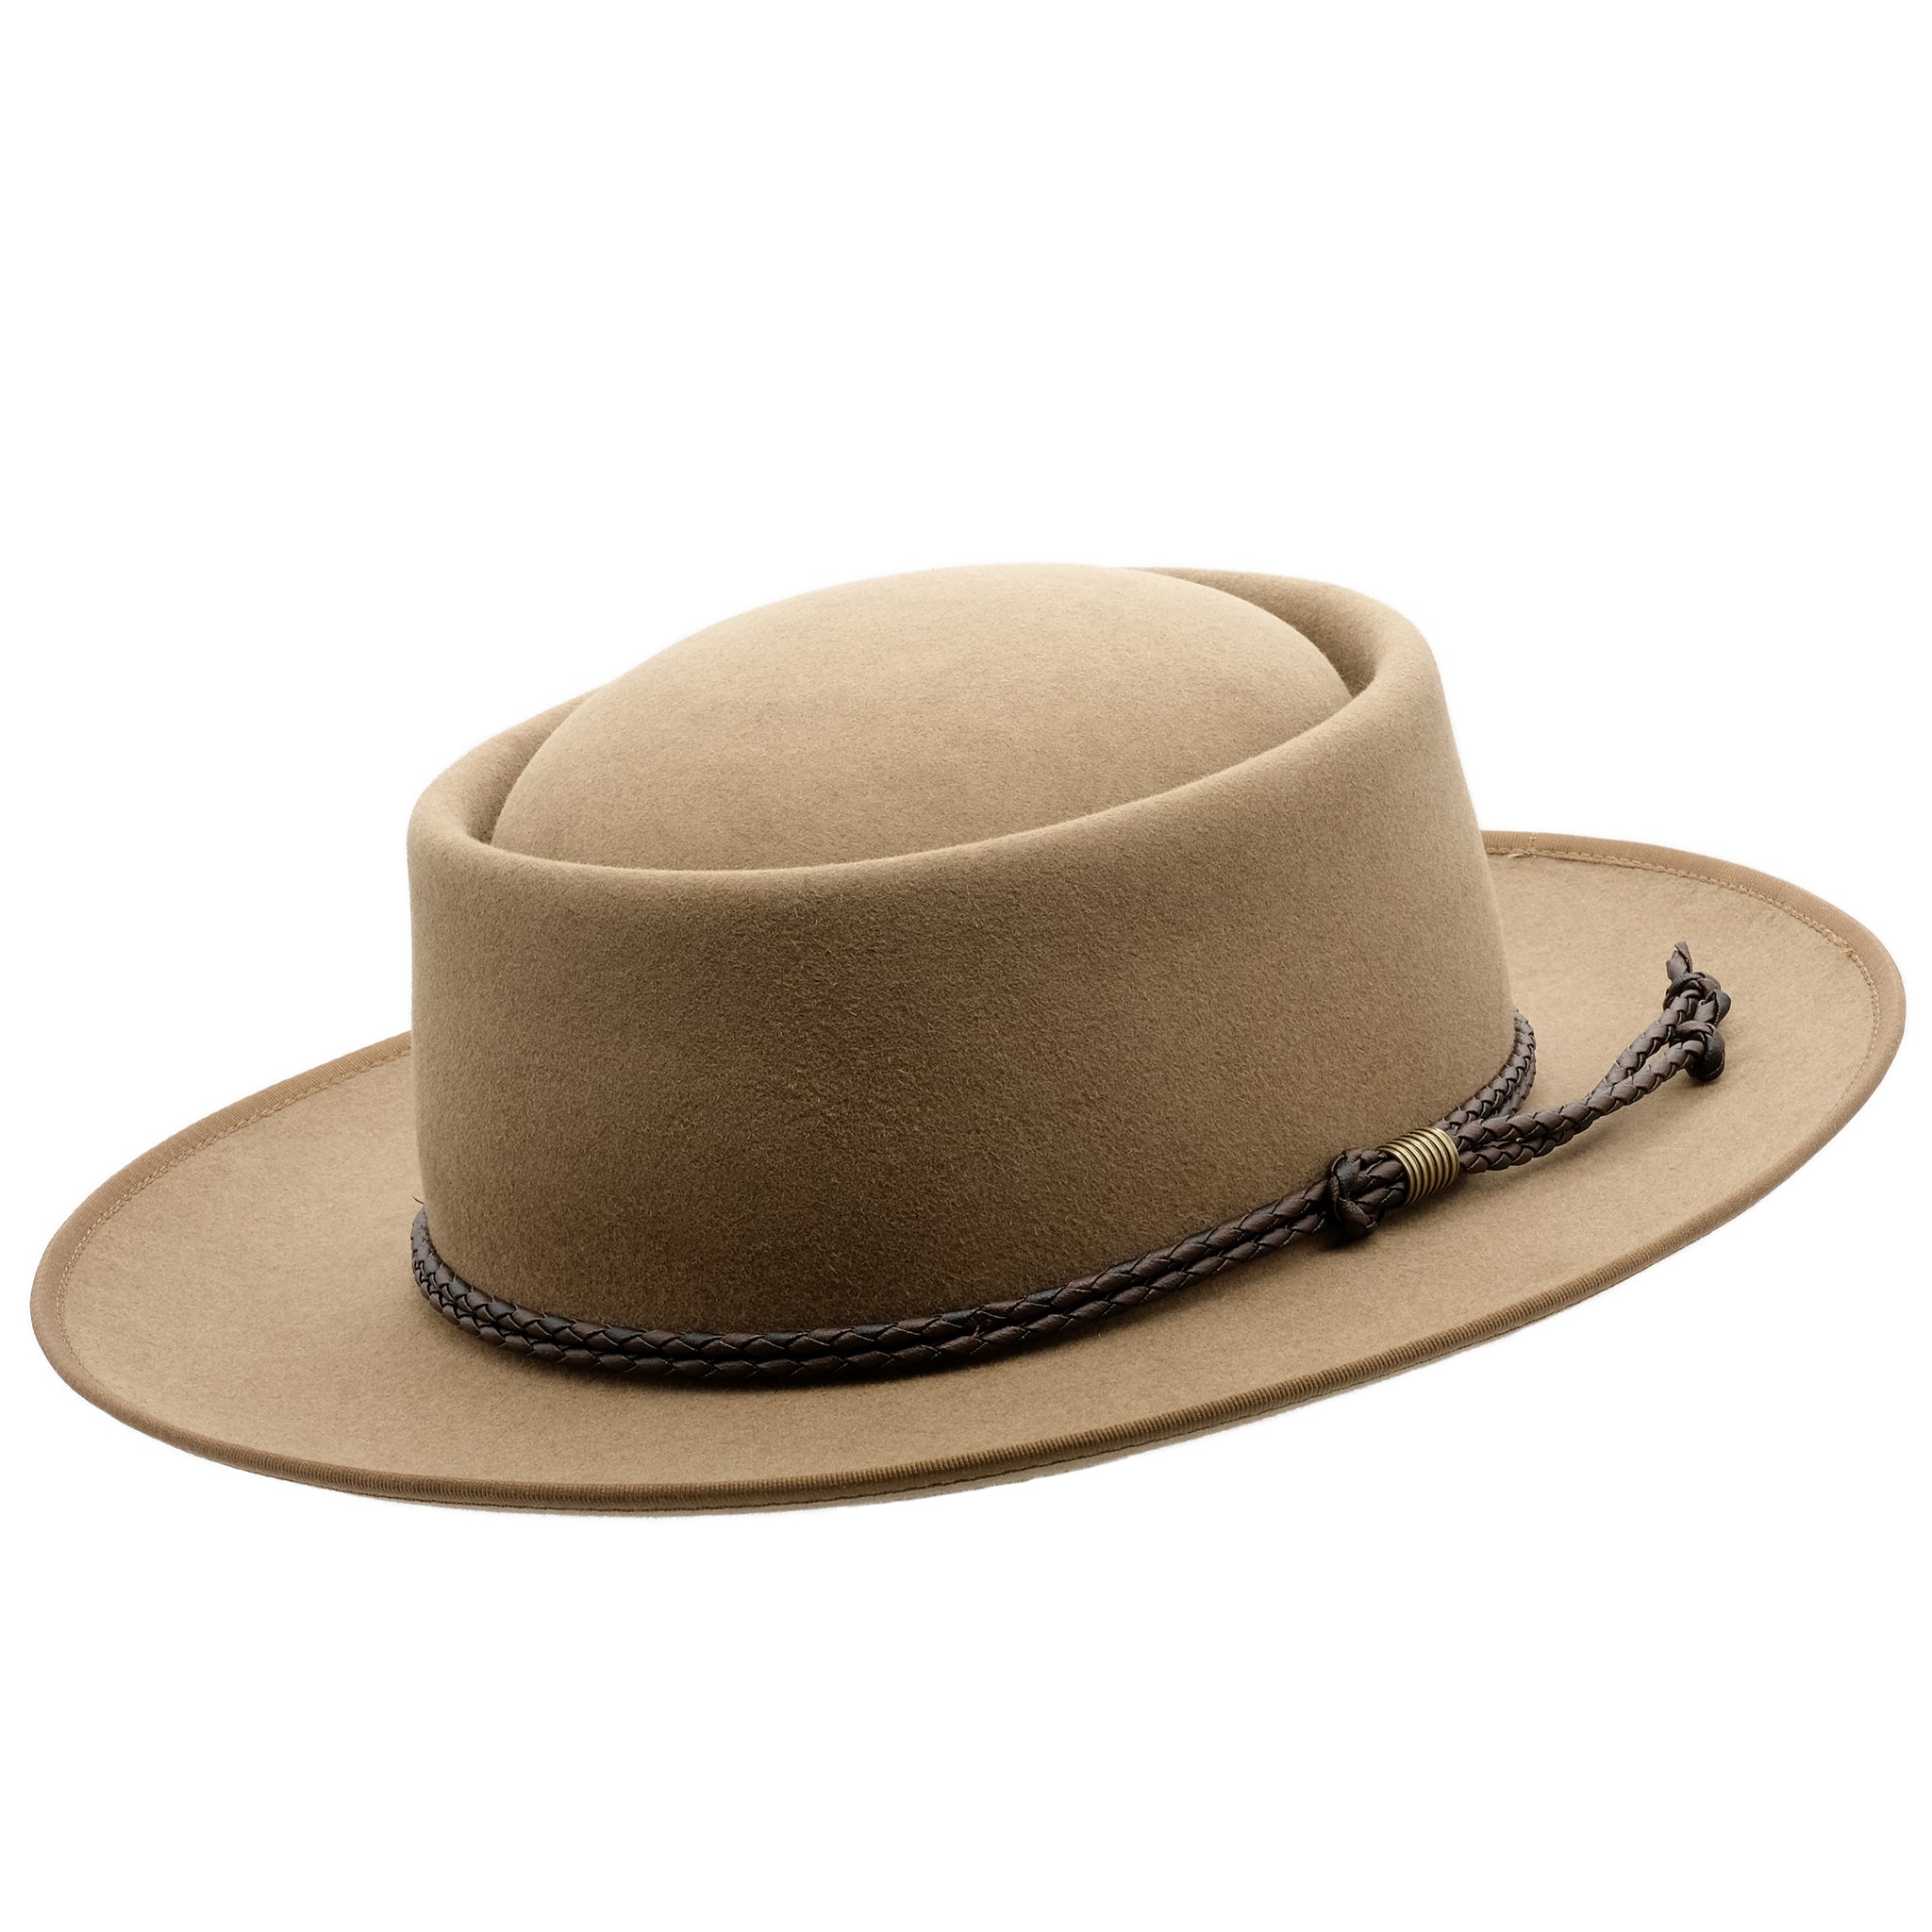 Angle view of the Akubra Pastoralist hat in Tawny Fawn colour